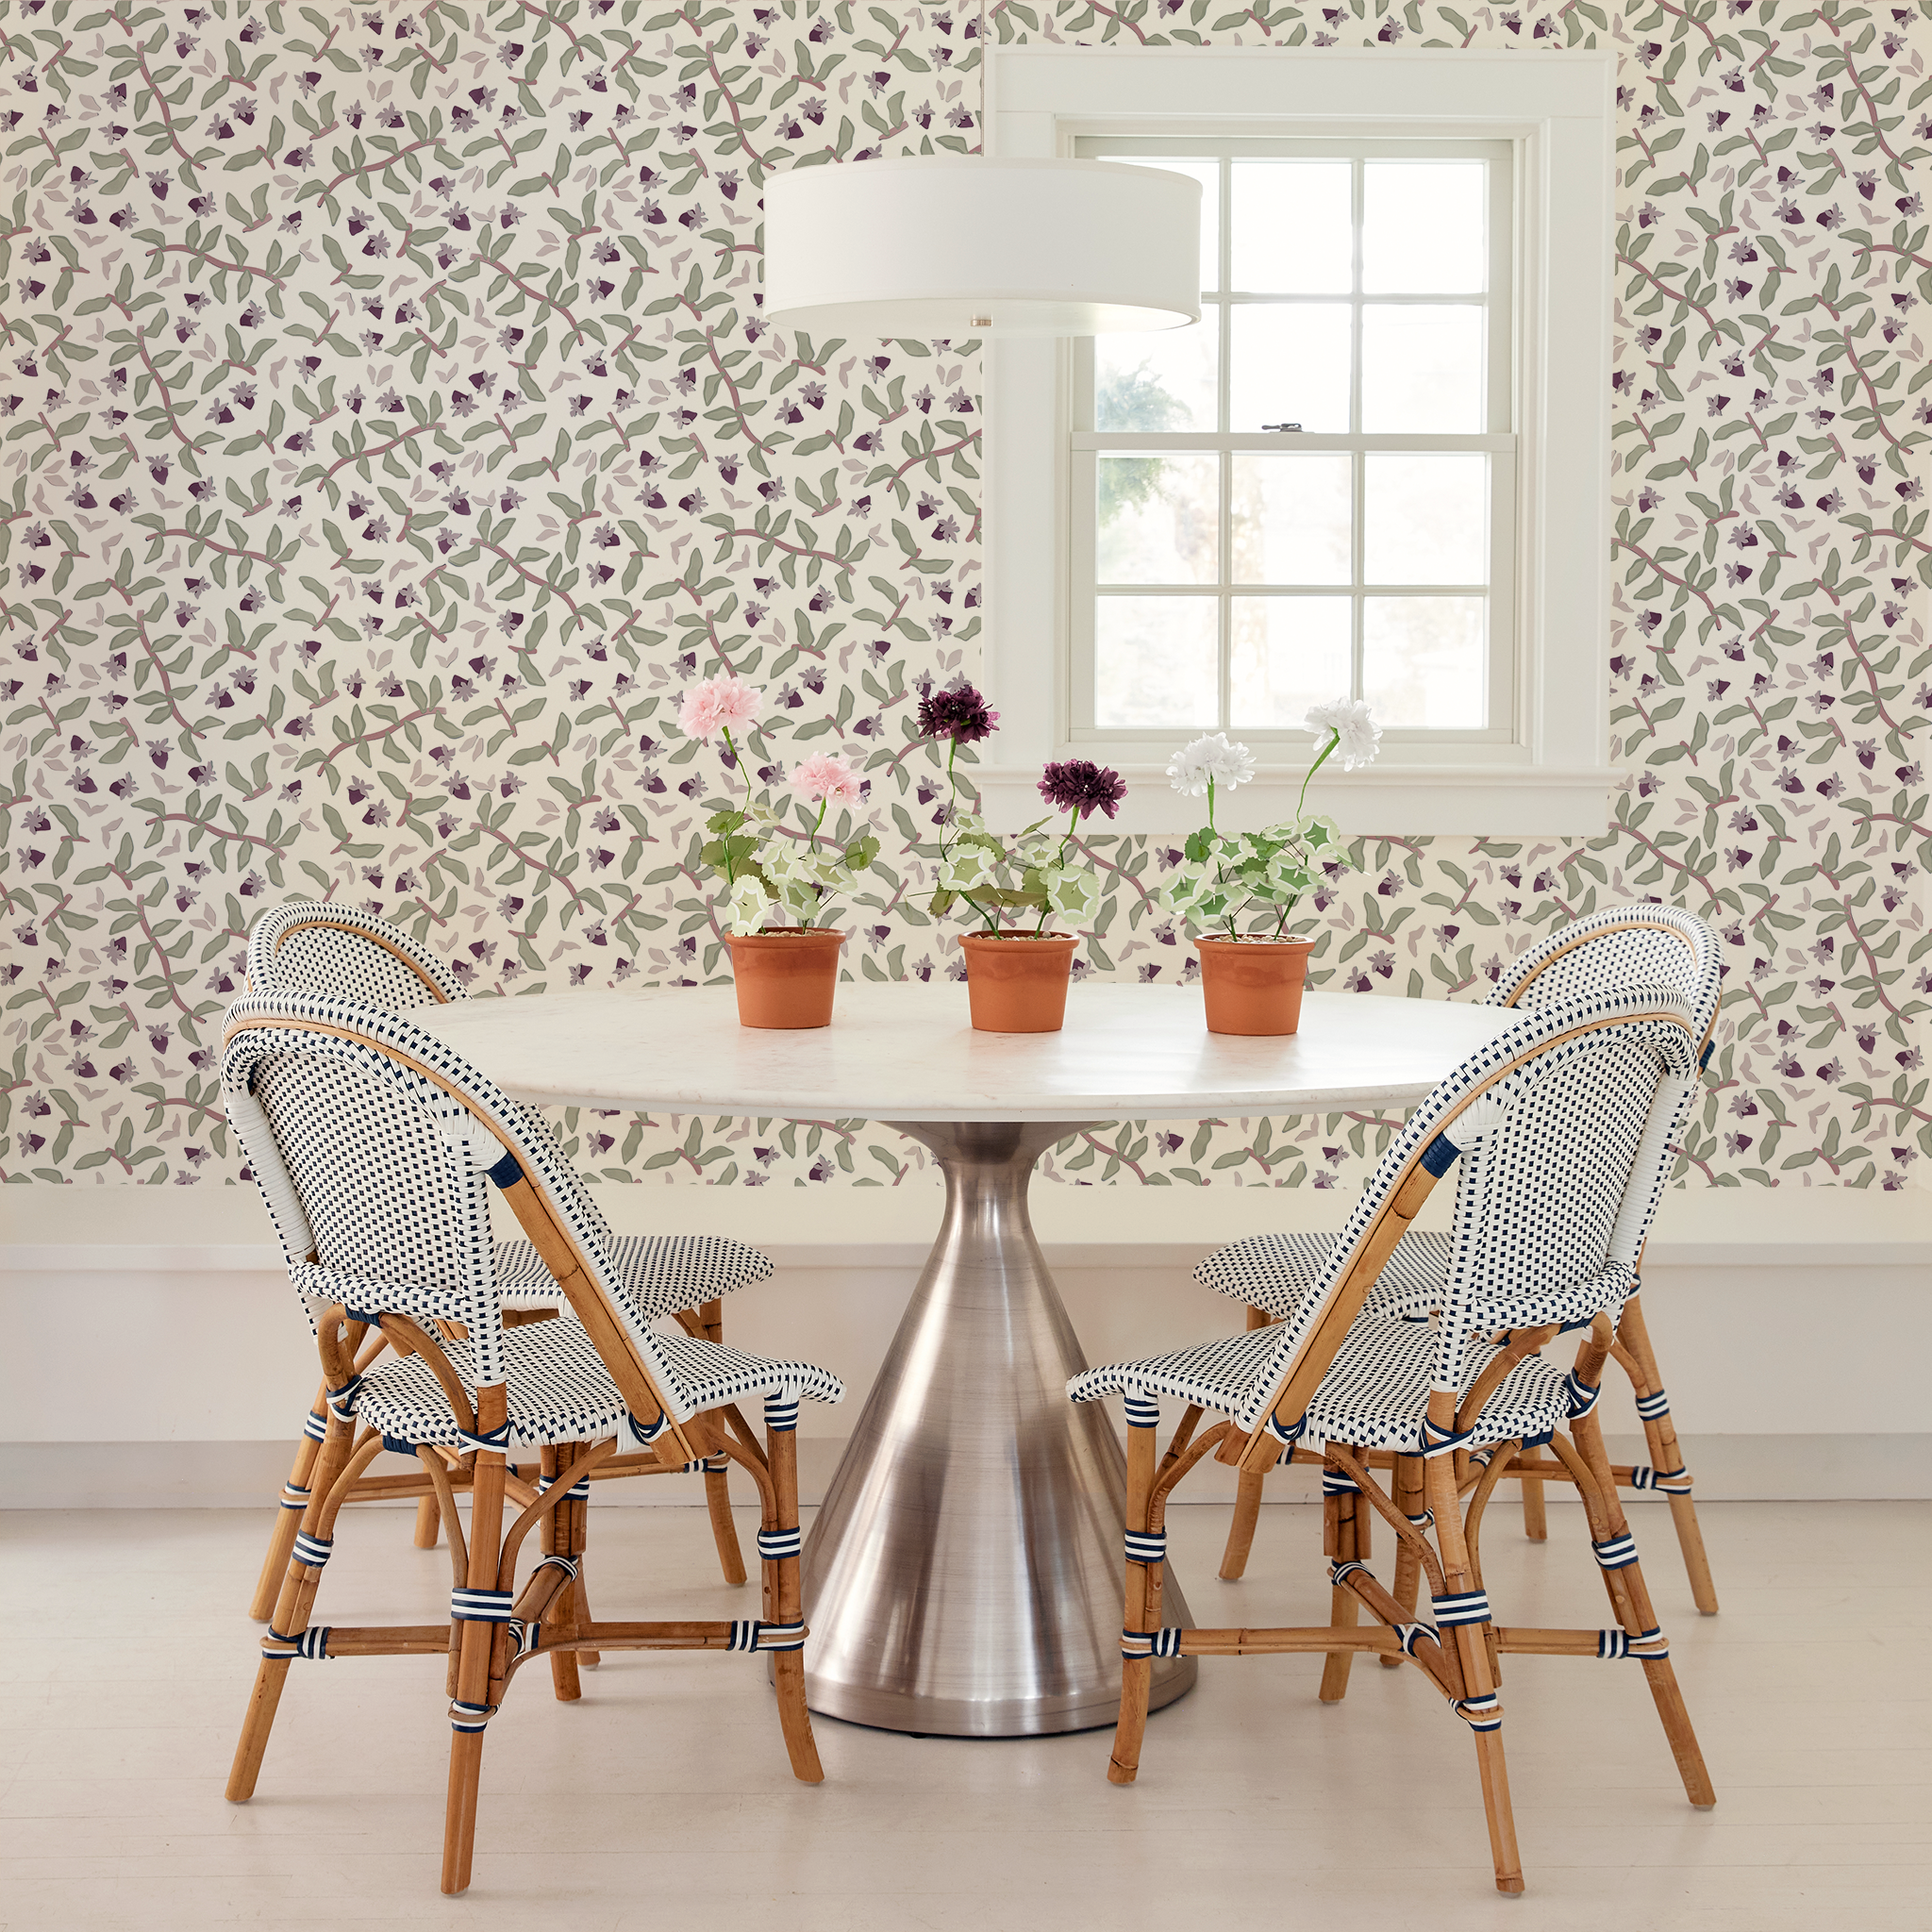 Round white table styled with three flower clay pots and four wooden chairs around next to Strawberry & Botanical Printed WallpRound white table styled with three flower clay pots and four wooden chairs around next to Strawberry & Botanical Printed Wallpaper by small rectangular windowaper by small rectangular window